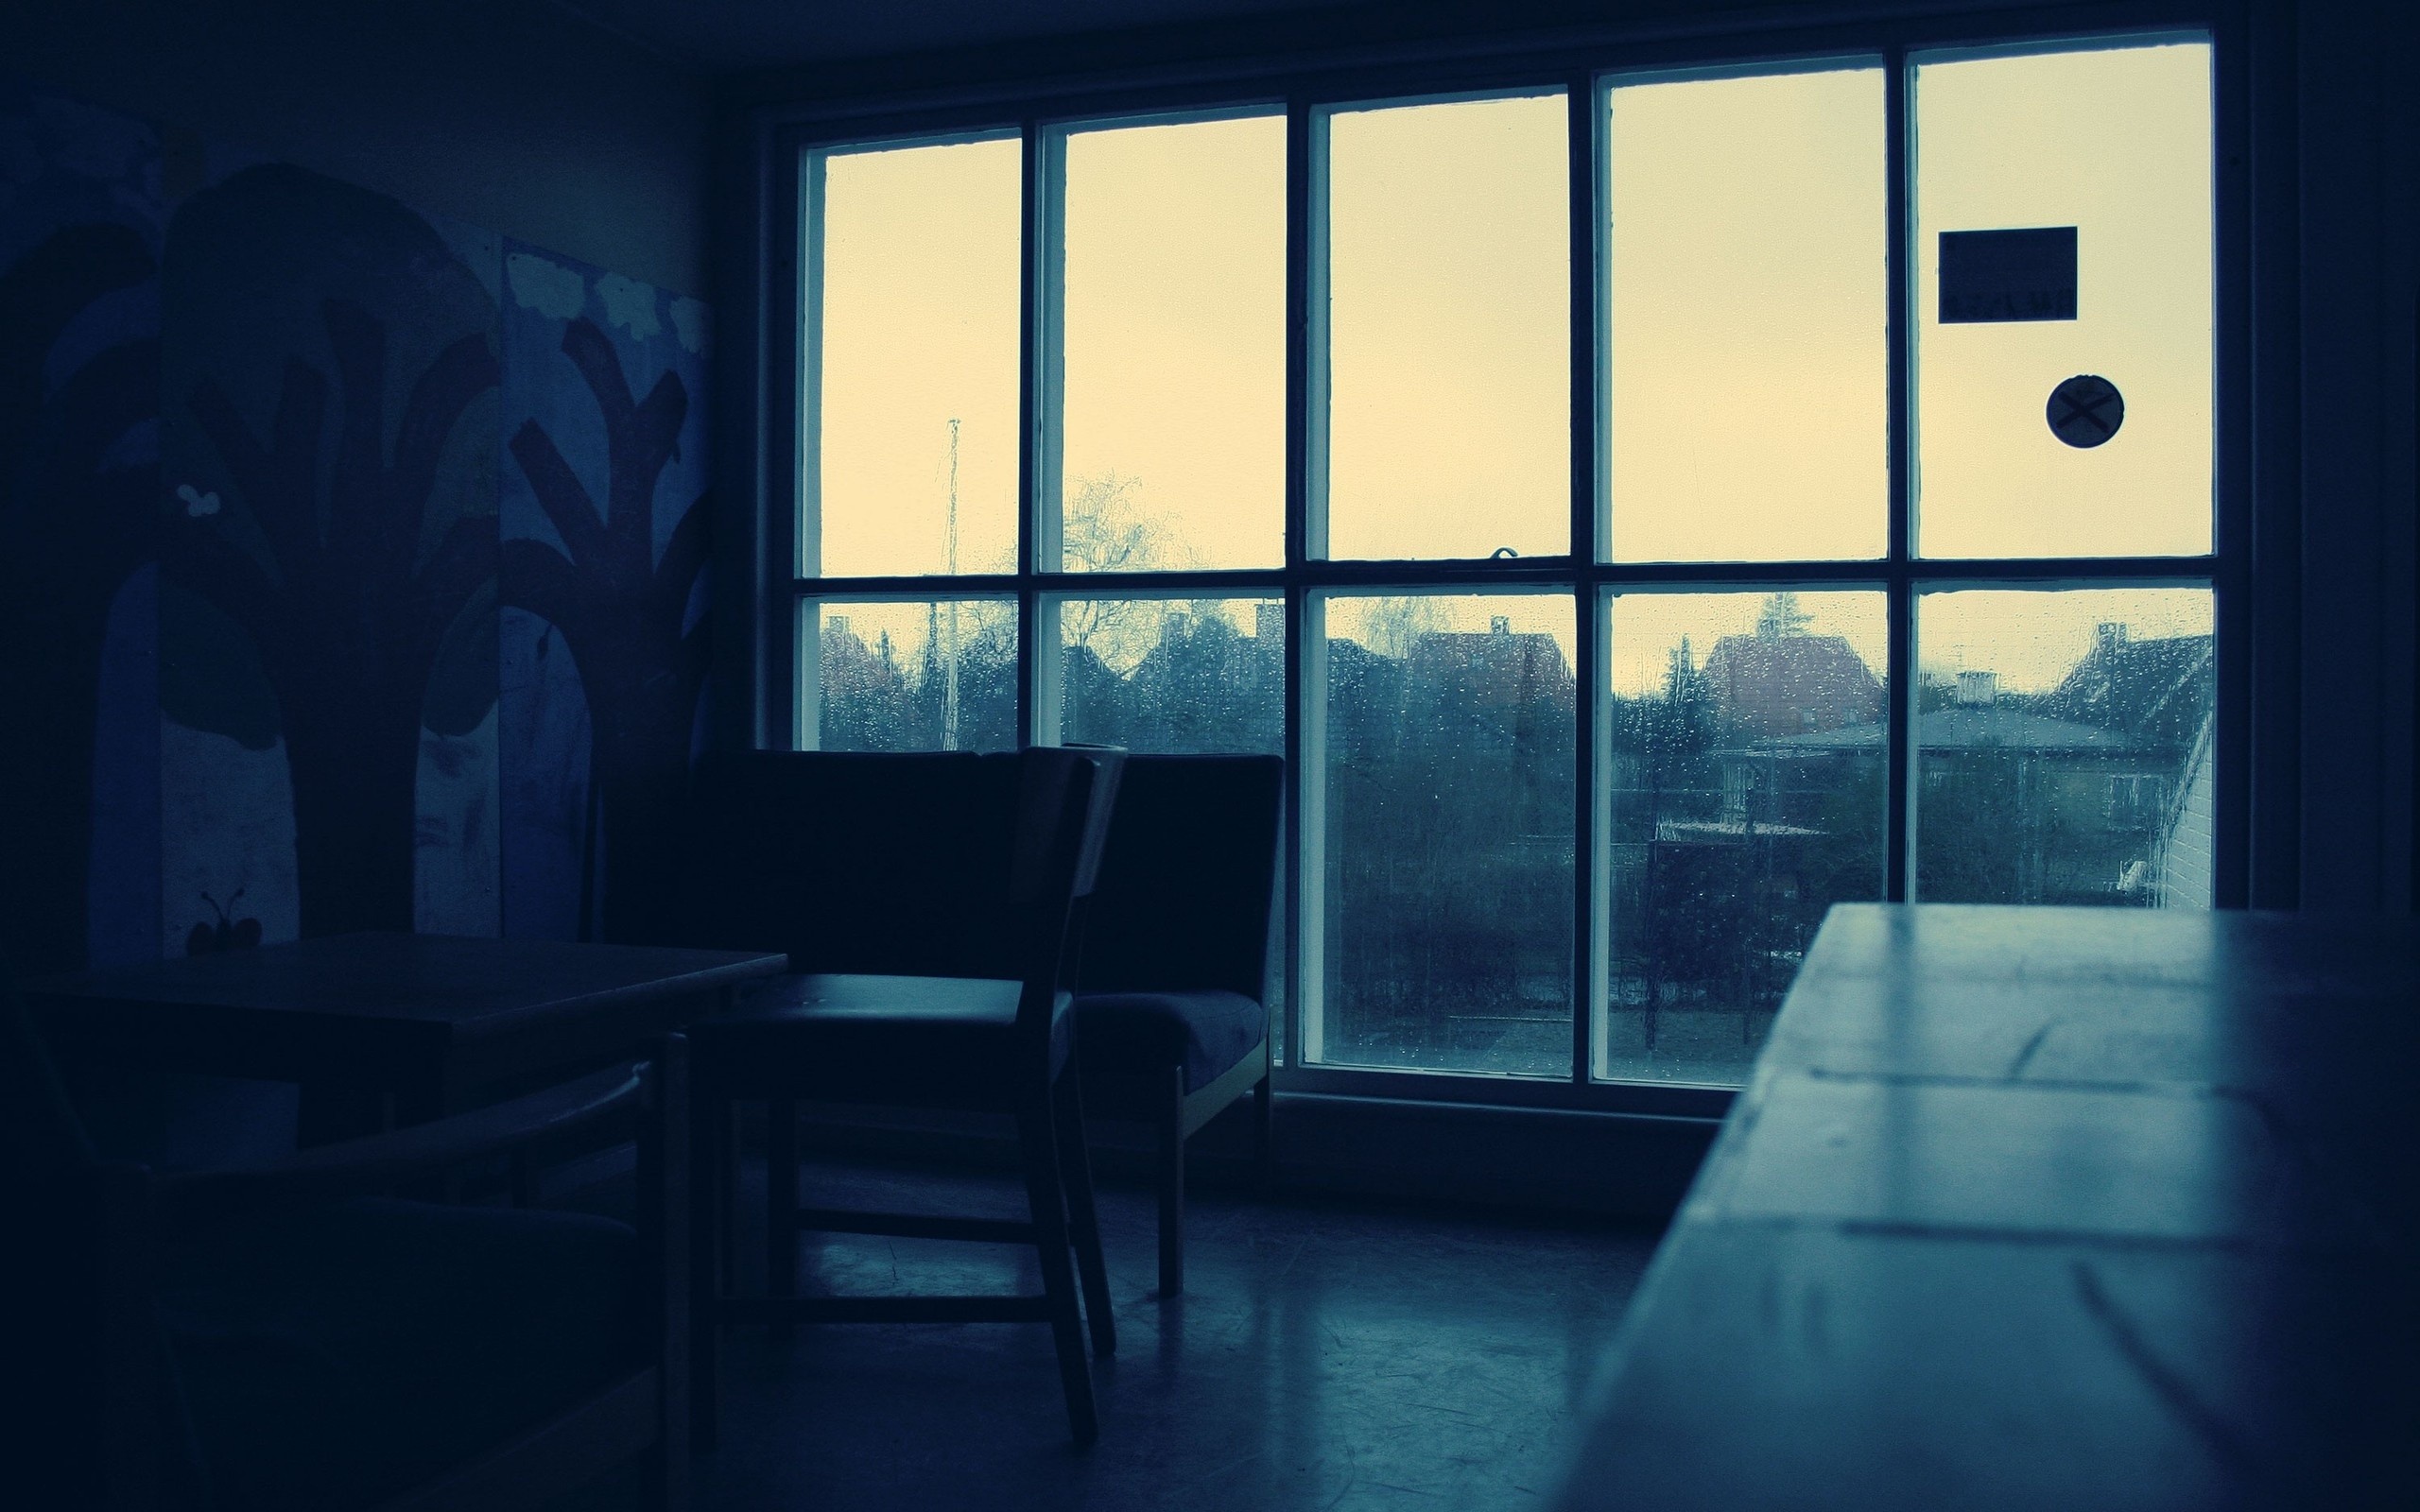 Wallpaper, room, rain, table, house, blue, chair, interior design, light, color, lighting, home, darkness, window covering 2560x1600